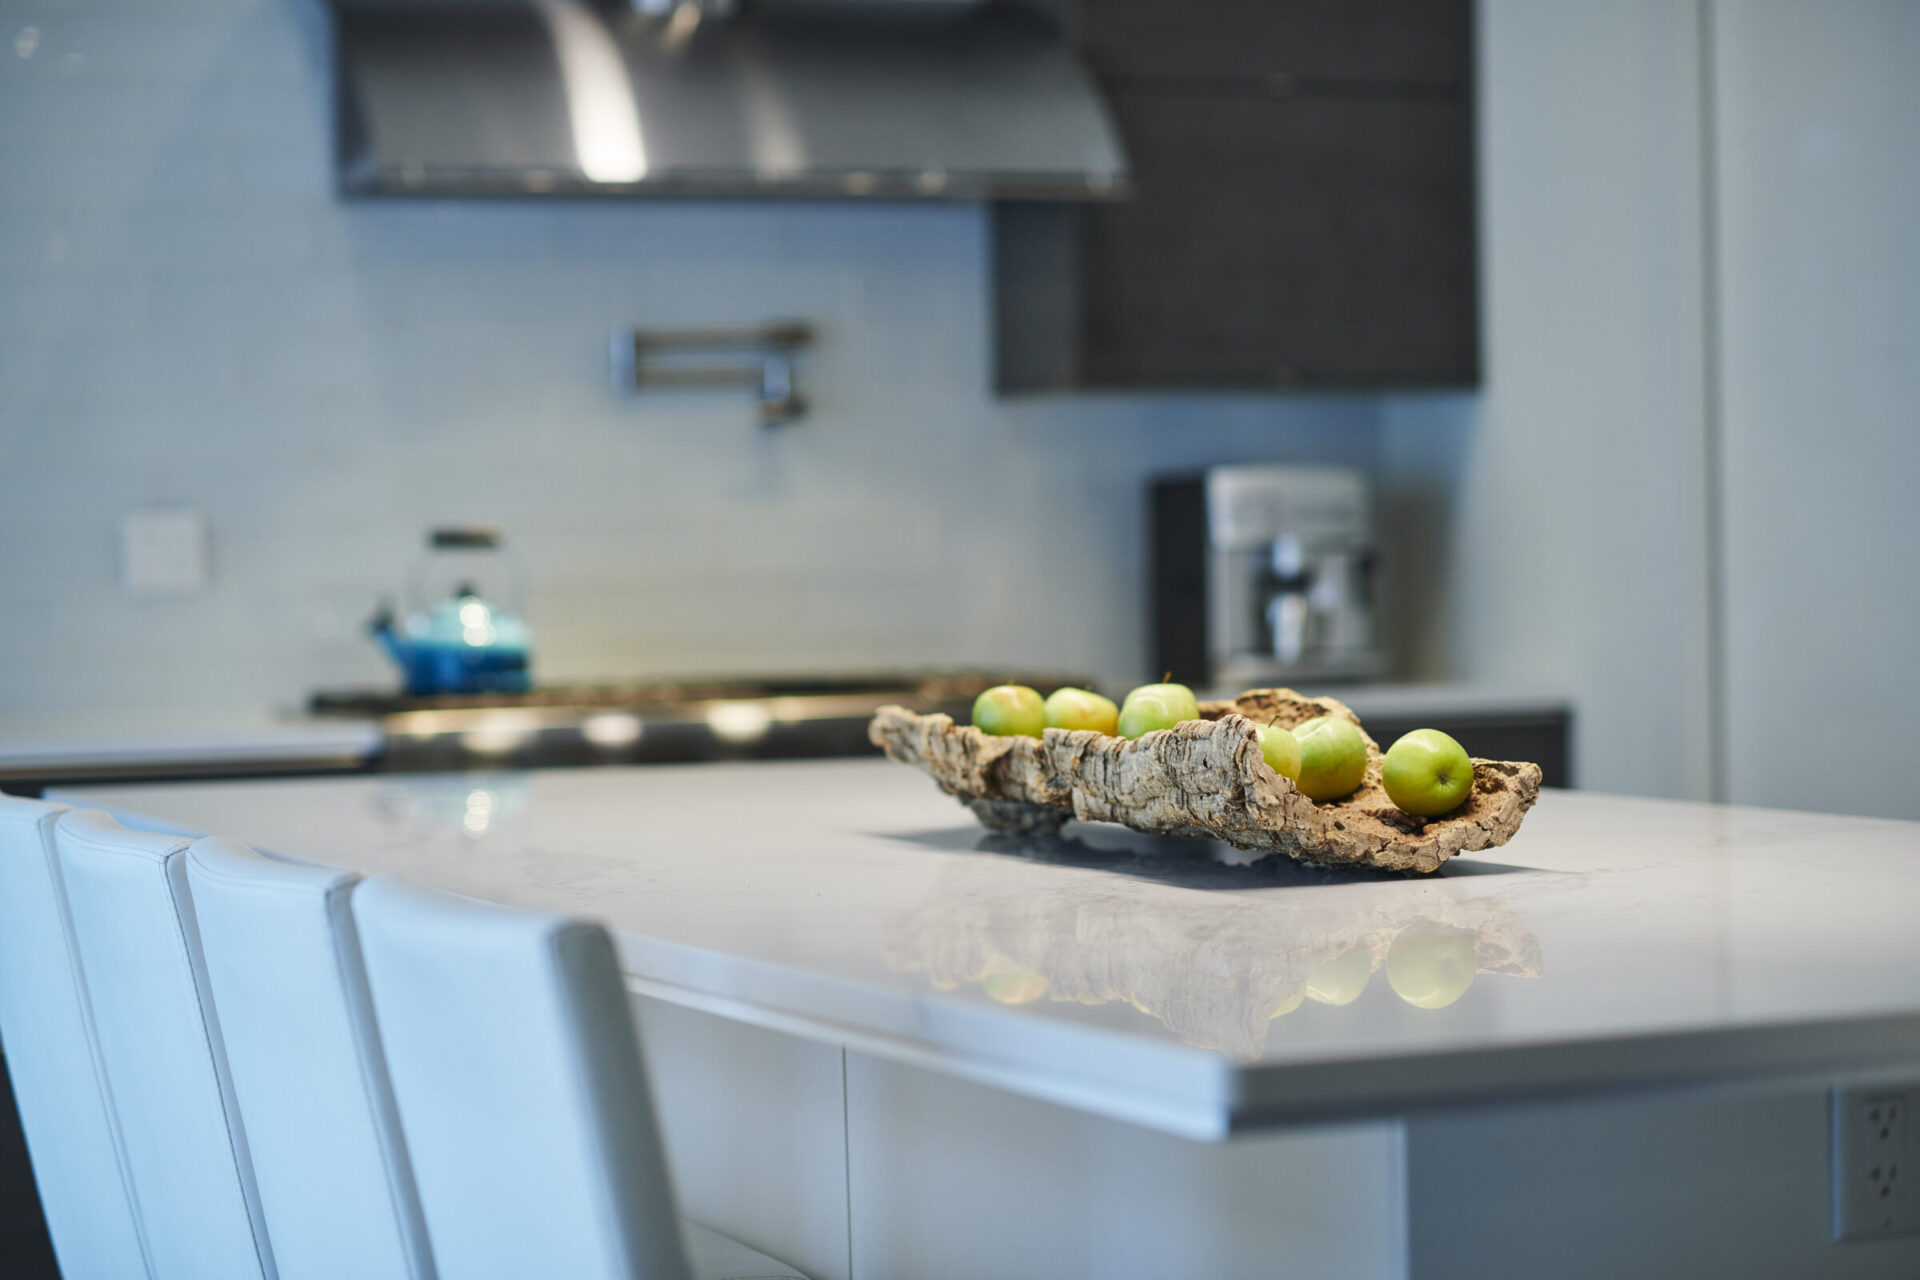 A modern kitchen interior with a white countertop, blurred blue kettle, stainless steel range hood, and a unique wooden fruit tray with green apples.